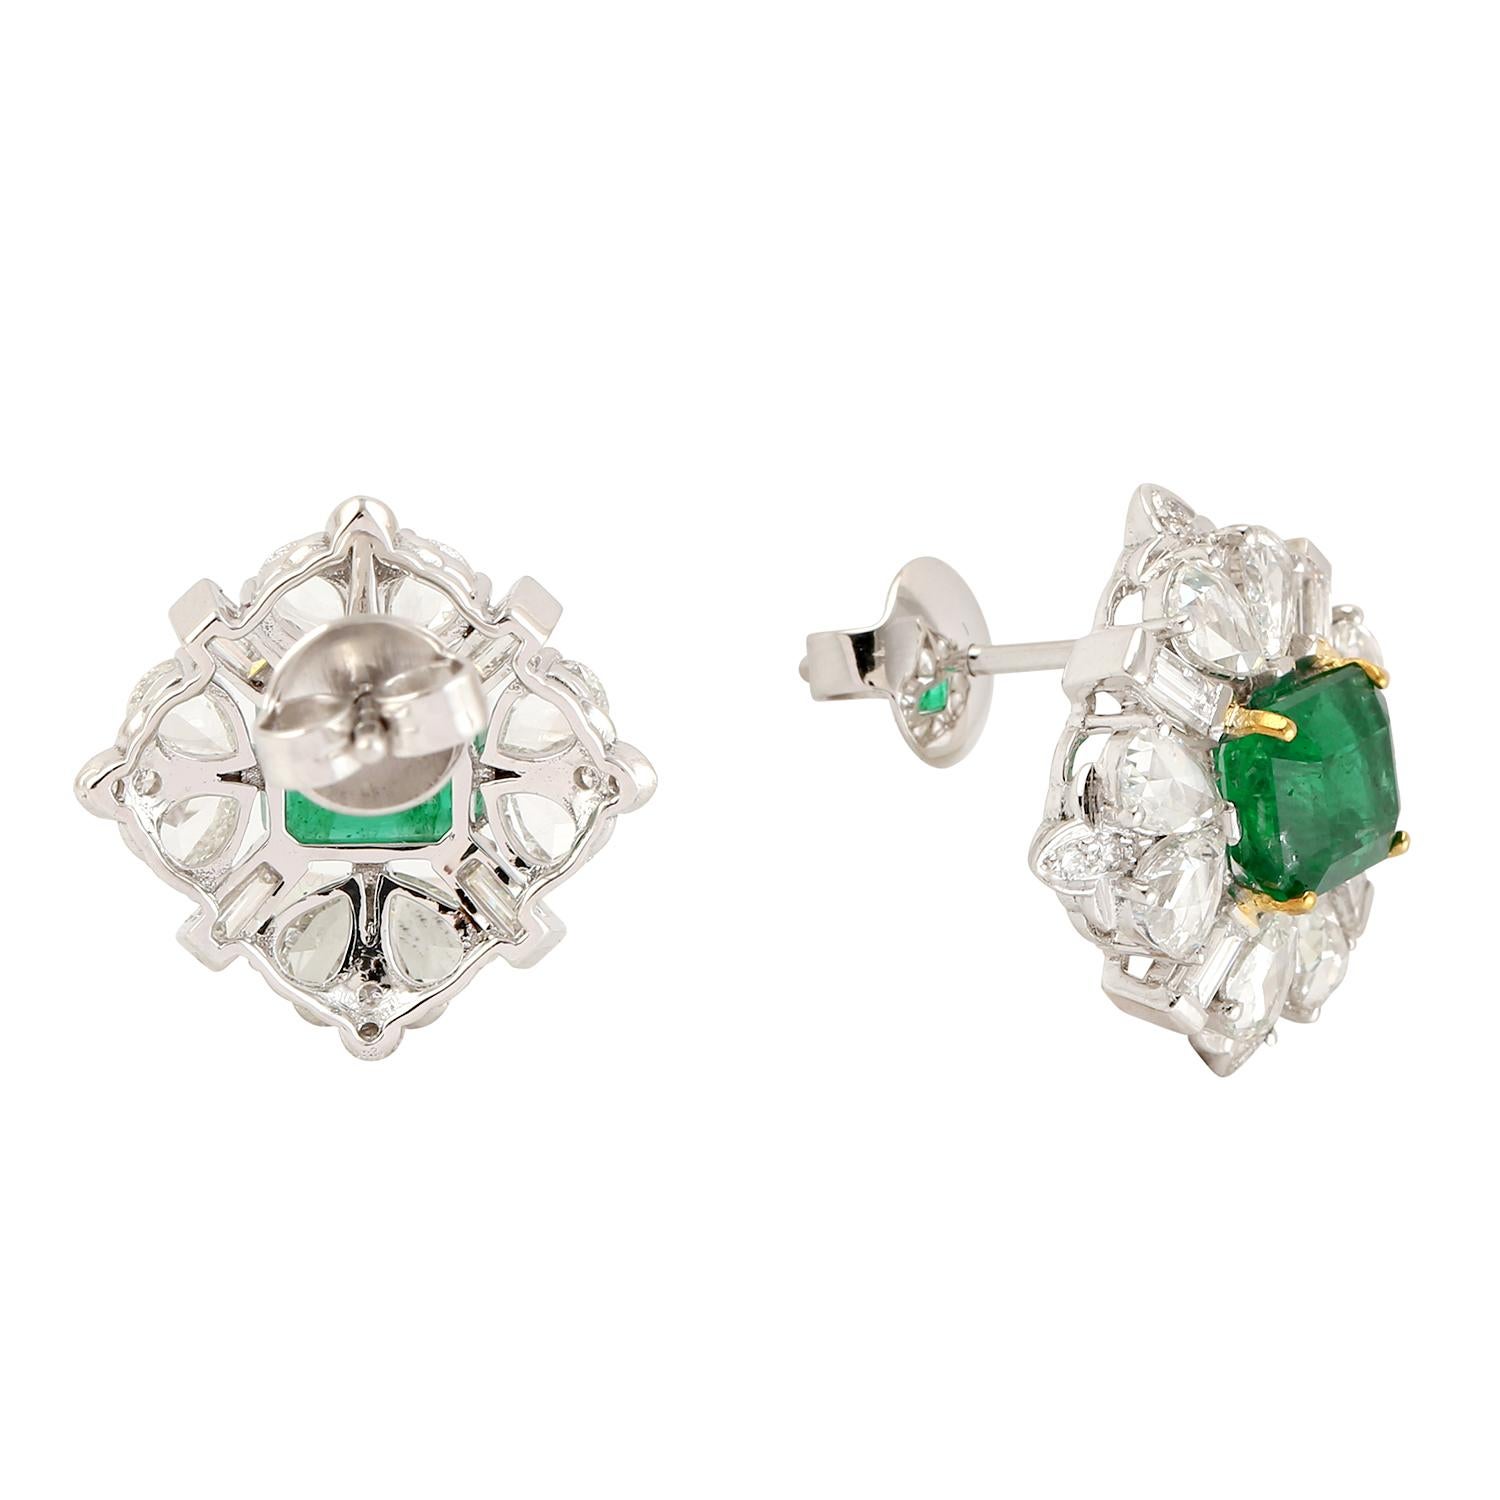 Emerald Cut Designer Rosecut Diamond and Emerald Stud Made in 18K White Gold For Sale